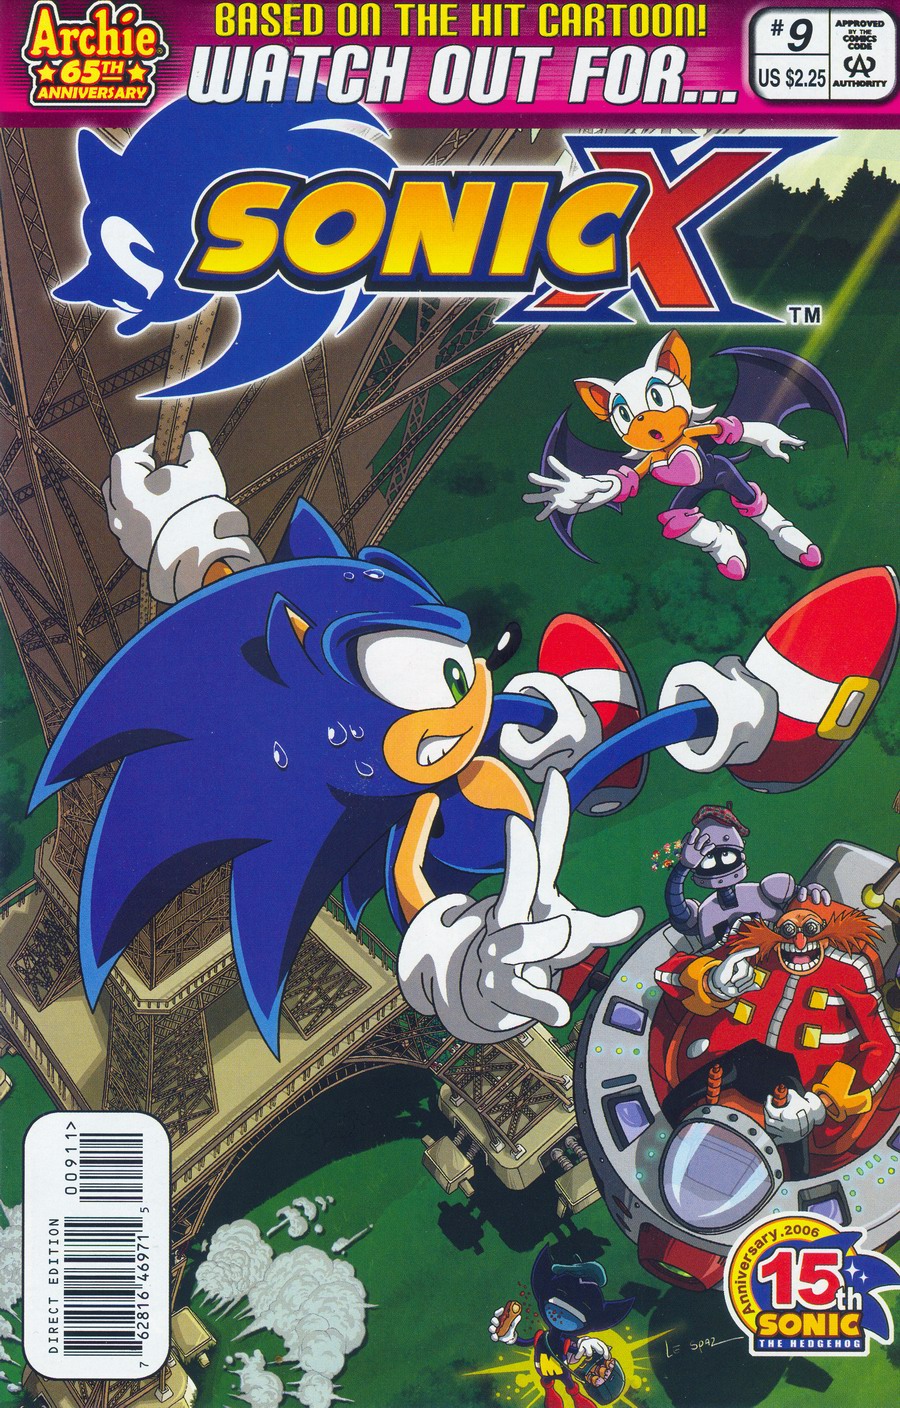 Sonic X - June 2006 Comic cover page